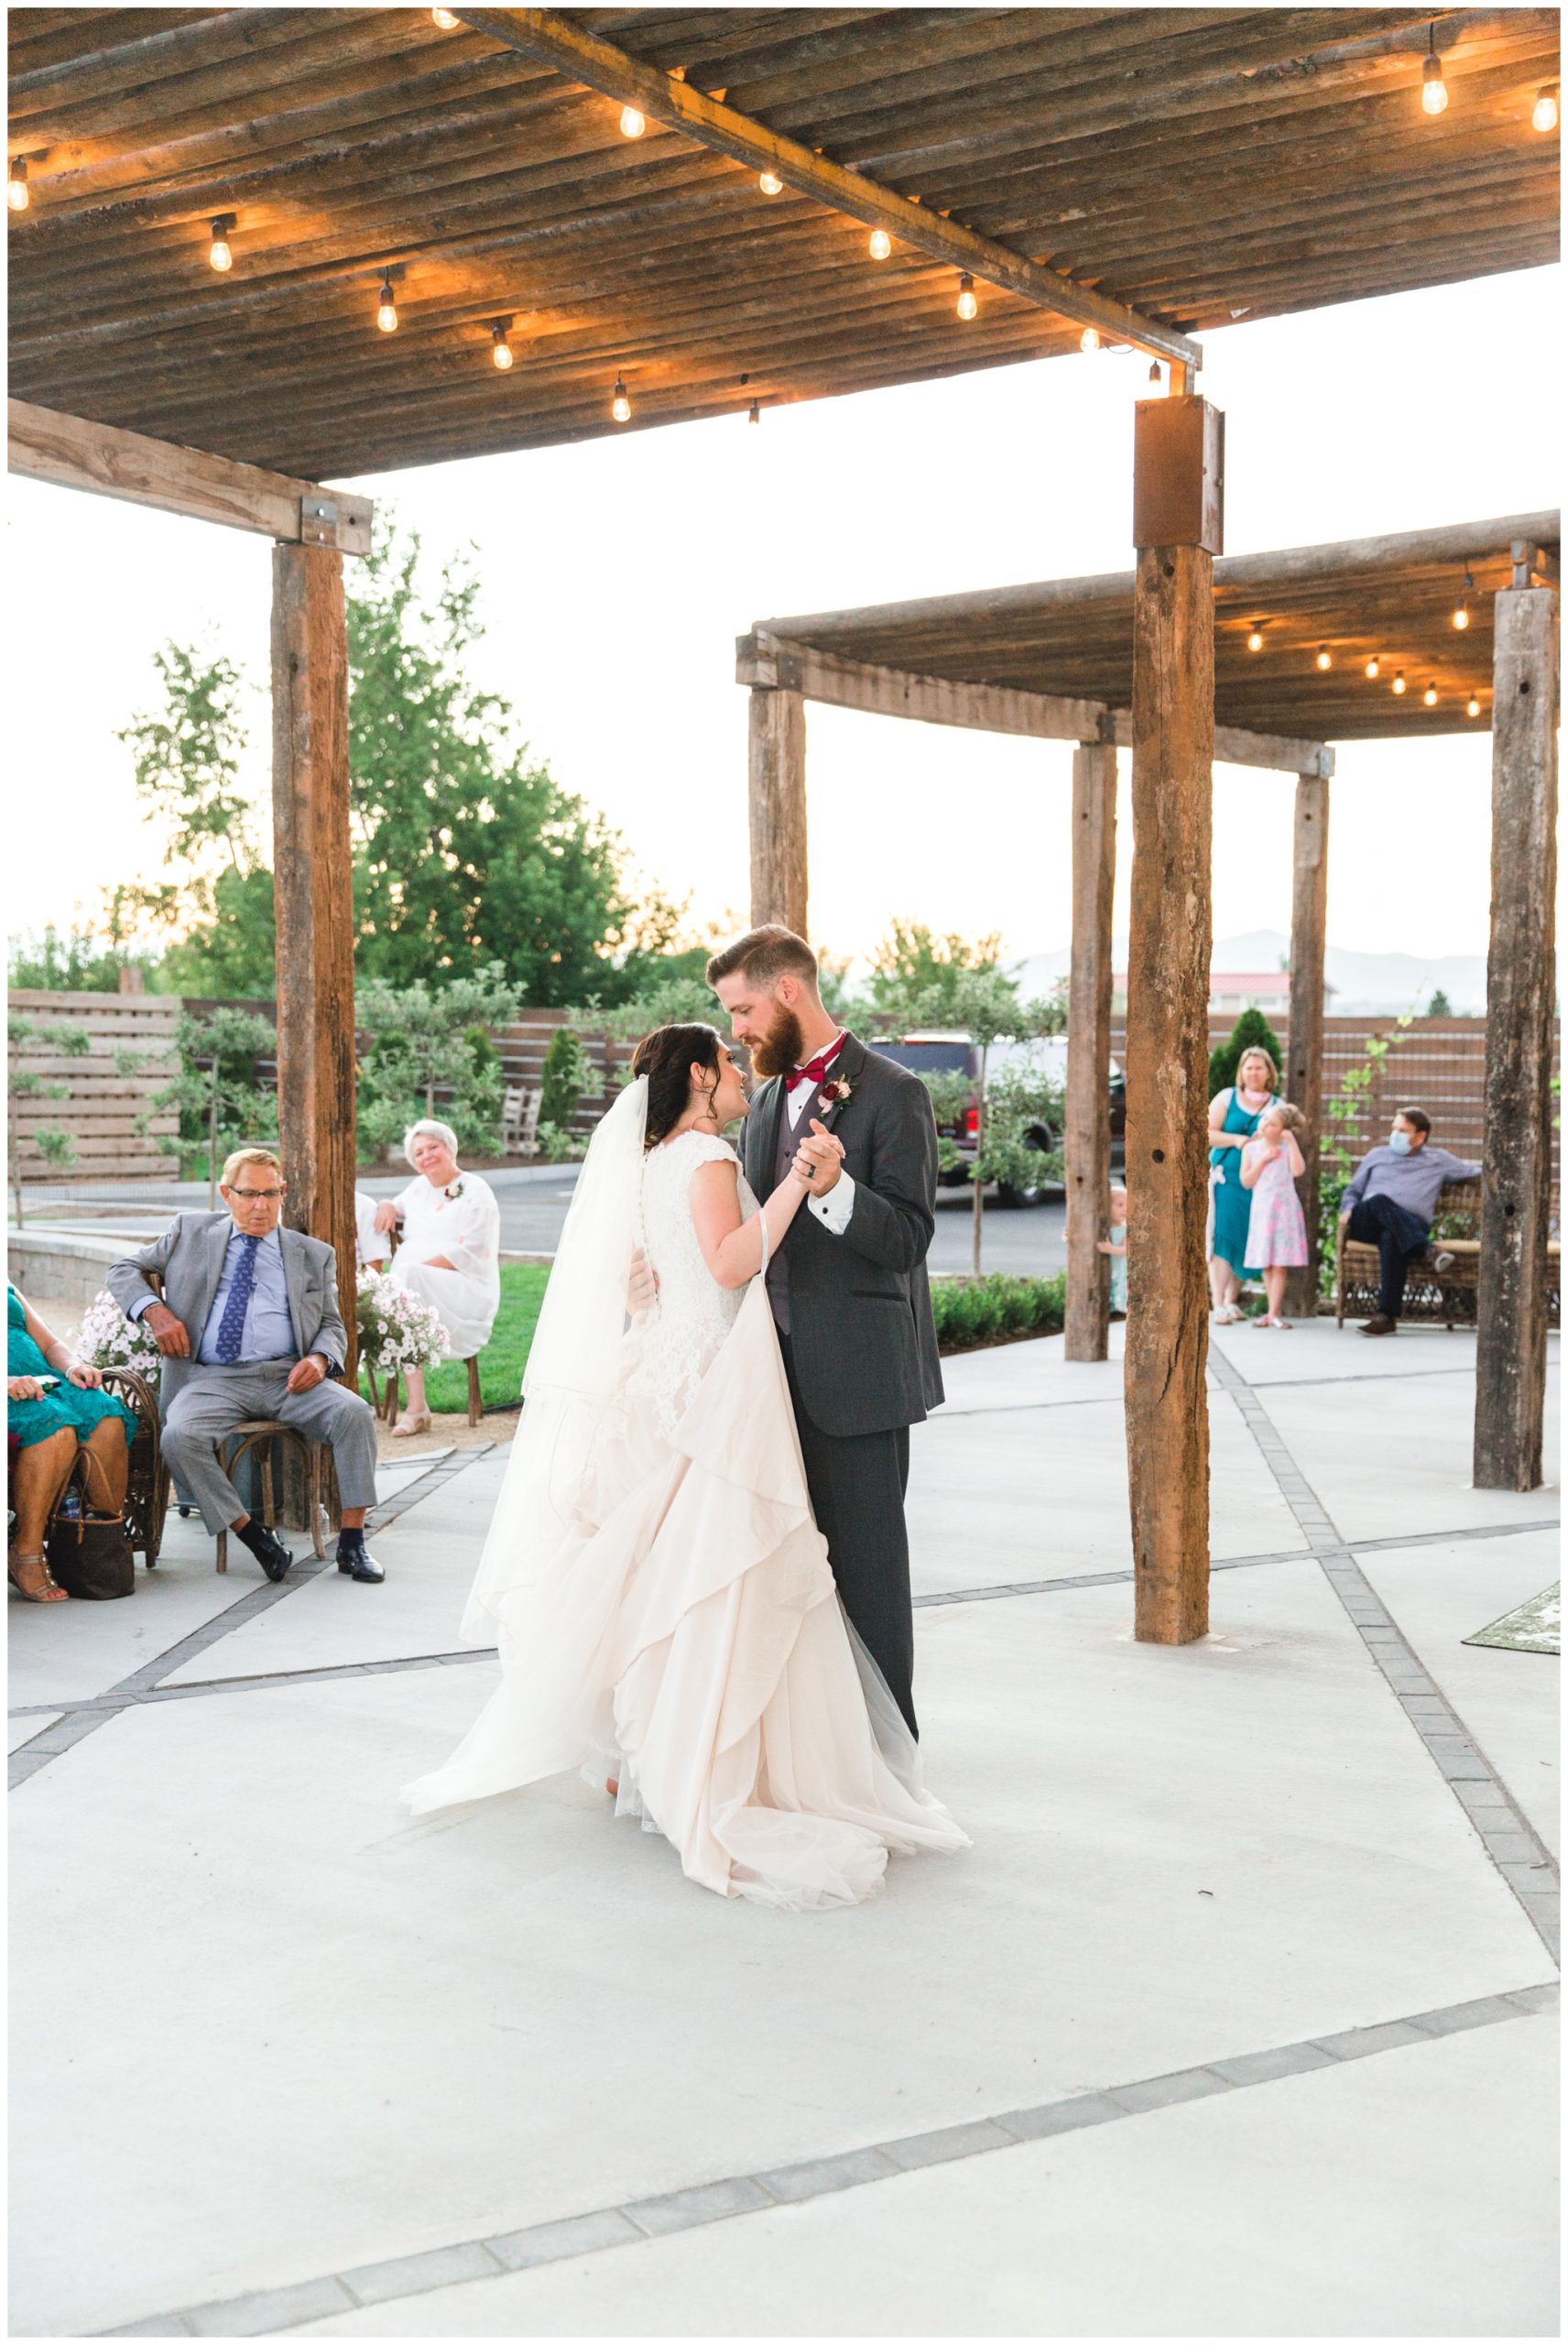 Bride and groom sharing their first dance as husband and wife at their wedding reception in Lindon Utah